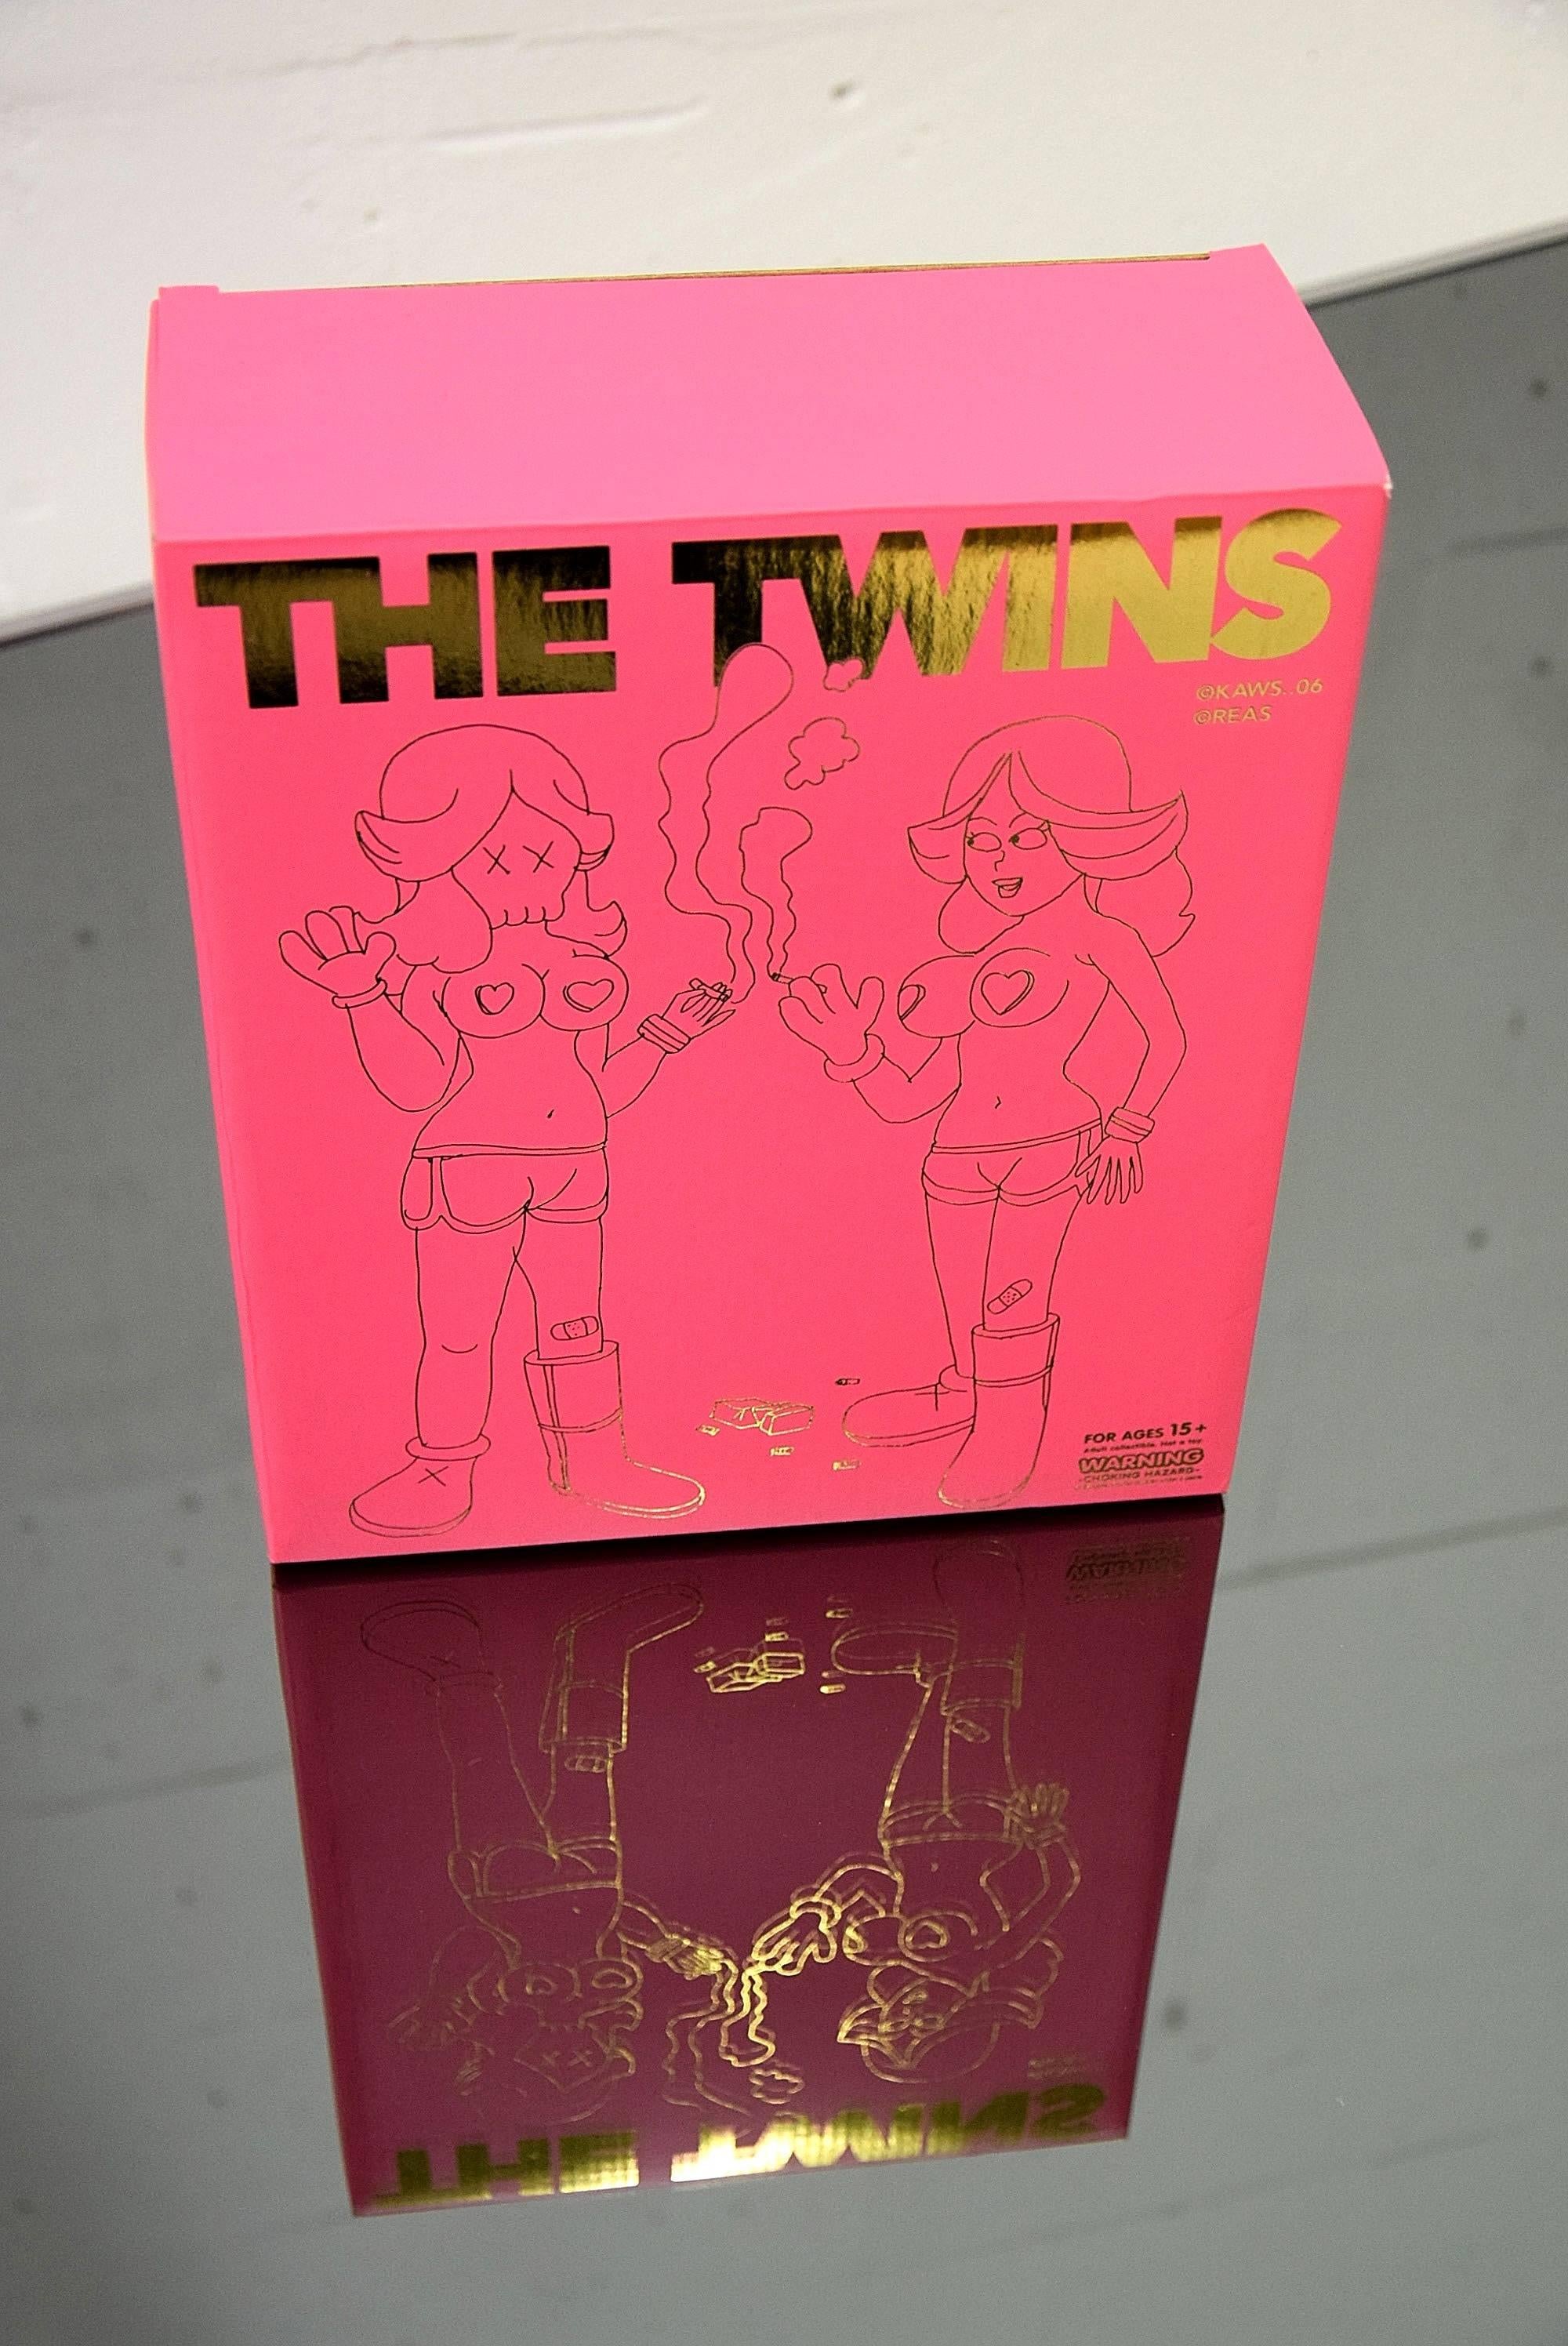 Twins by Kaws and Todd James, 2004 4